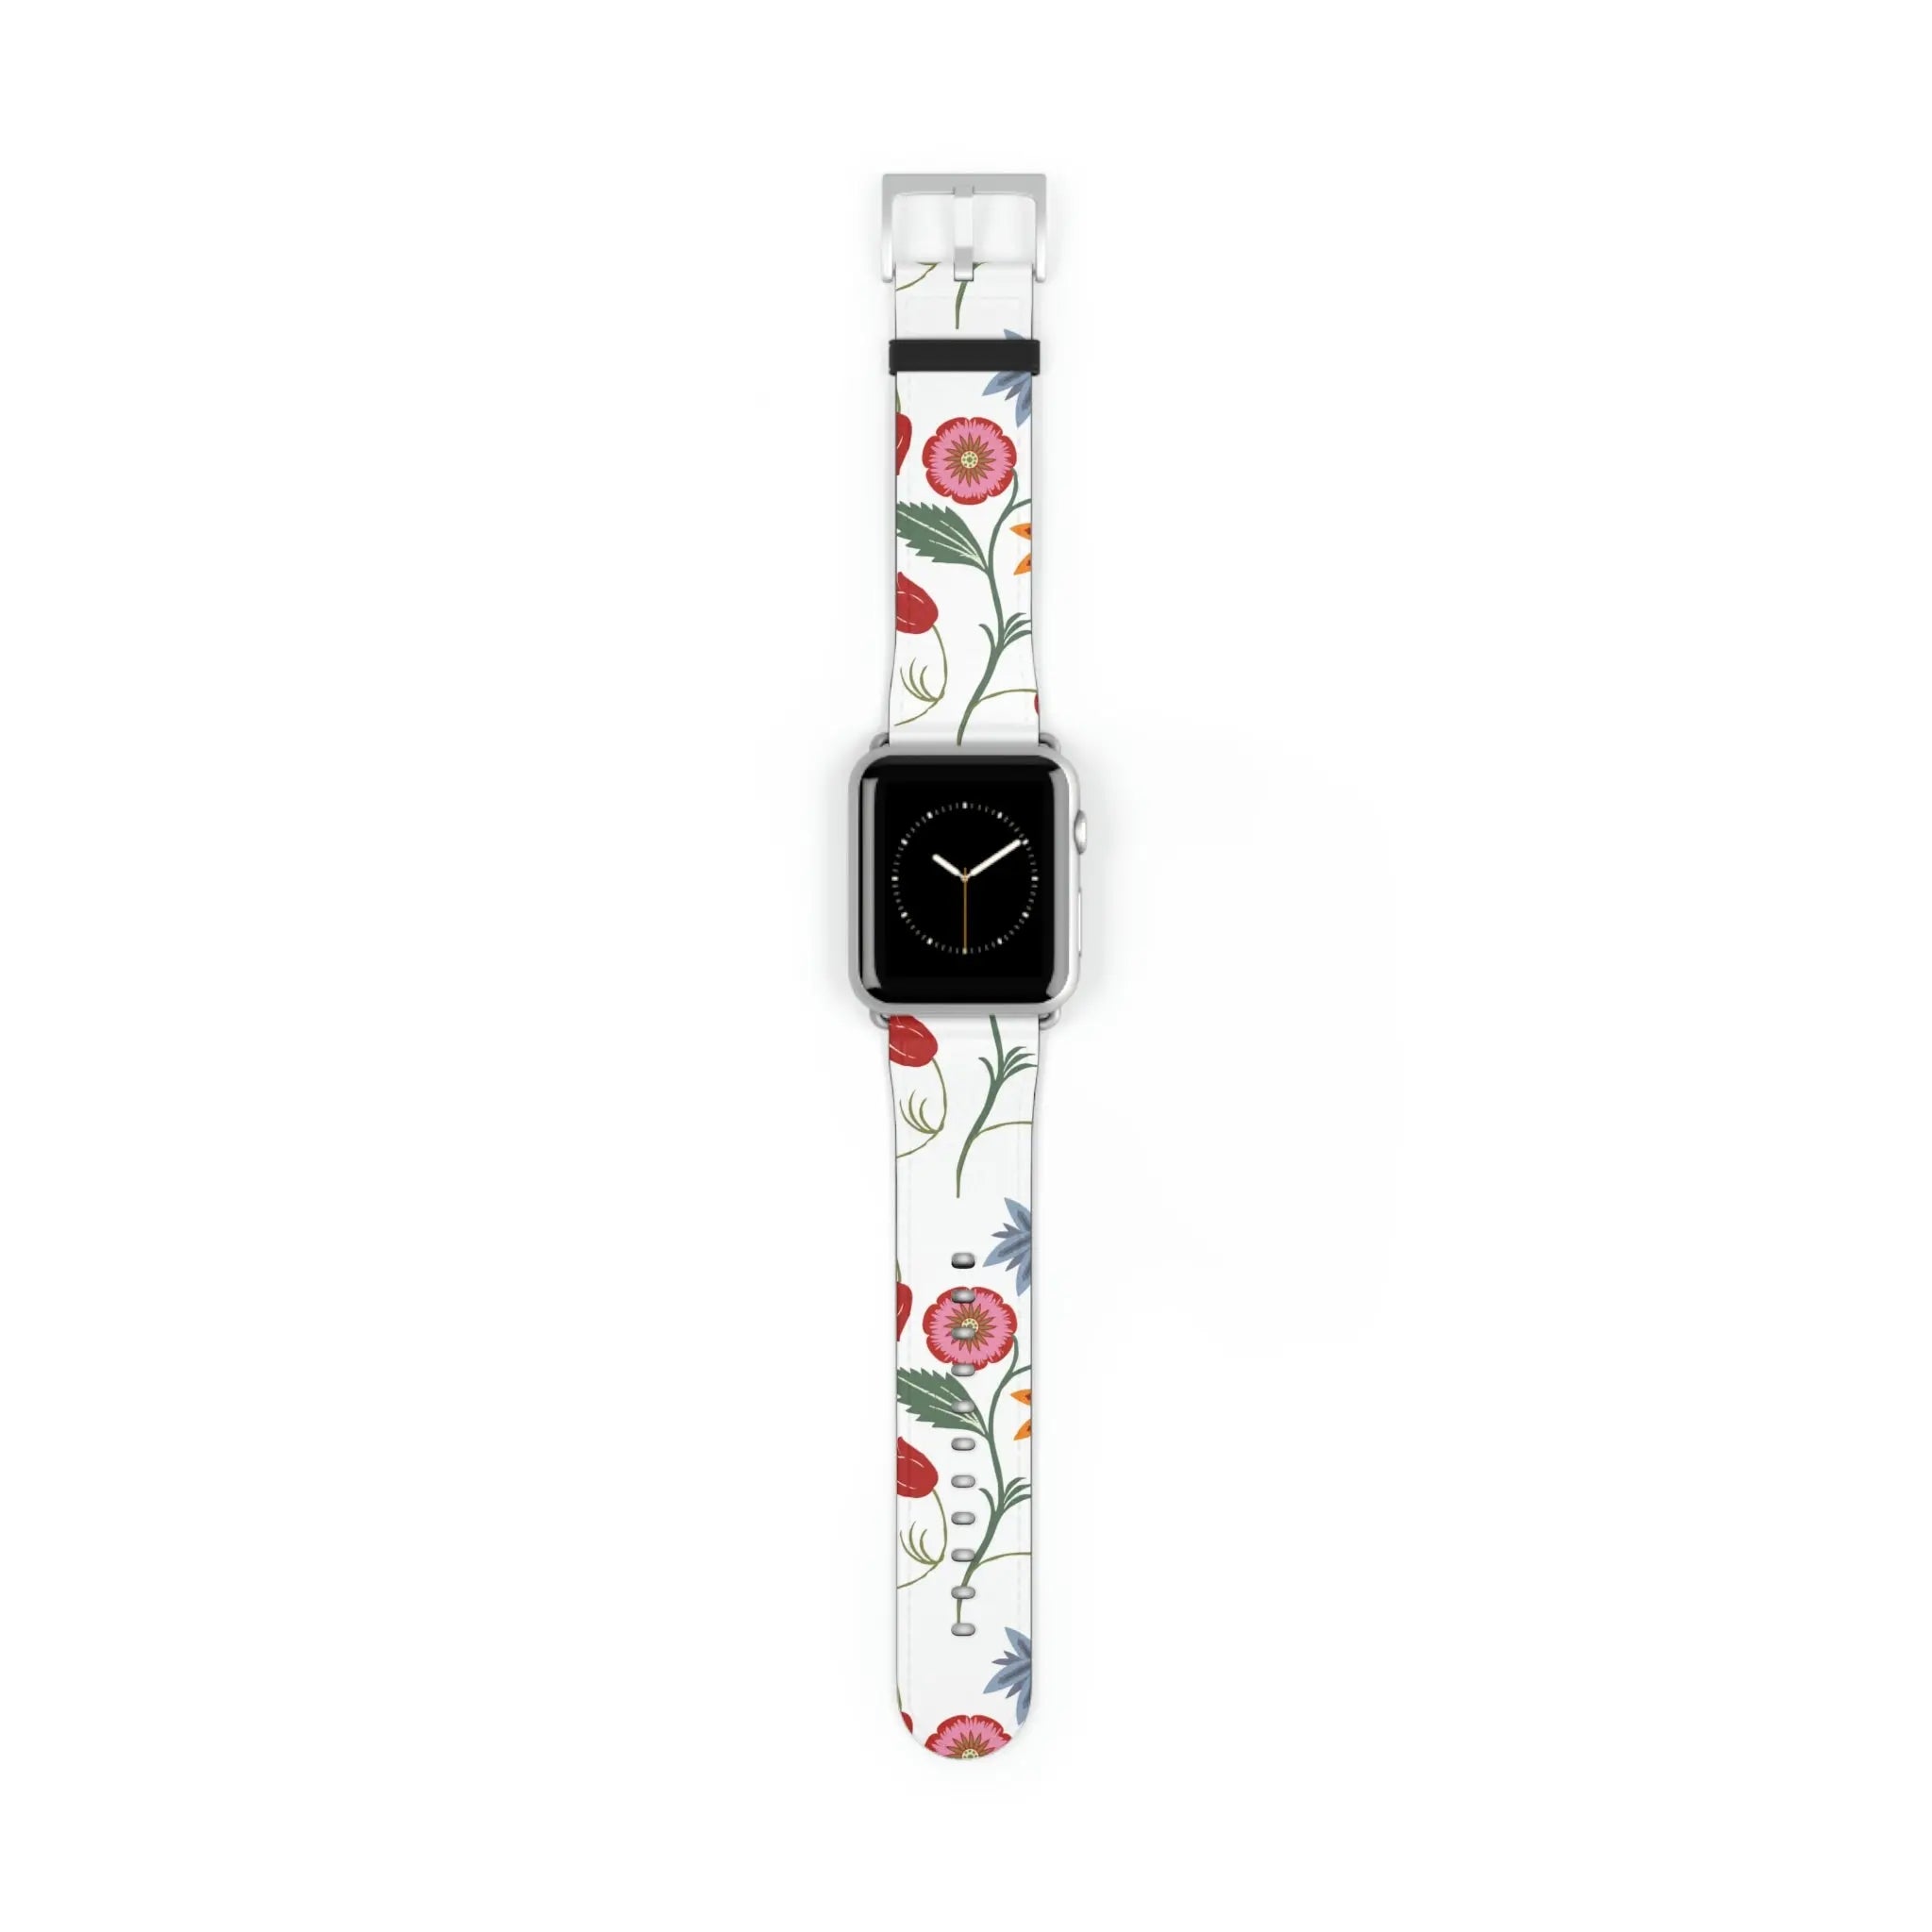  Just Bloom (Wild Flowers) Watch Band for Apple Watch Watch Bands42-45mmSilverMatte